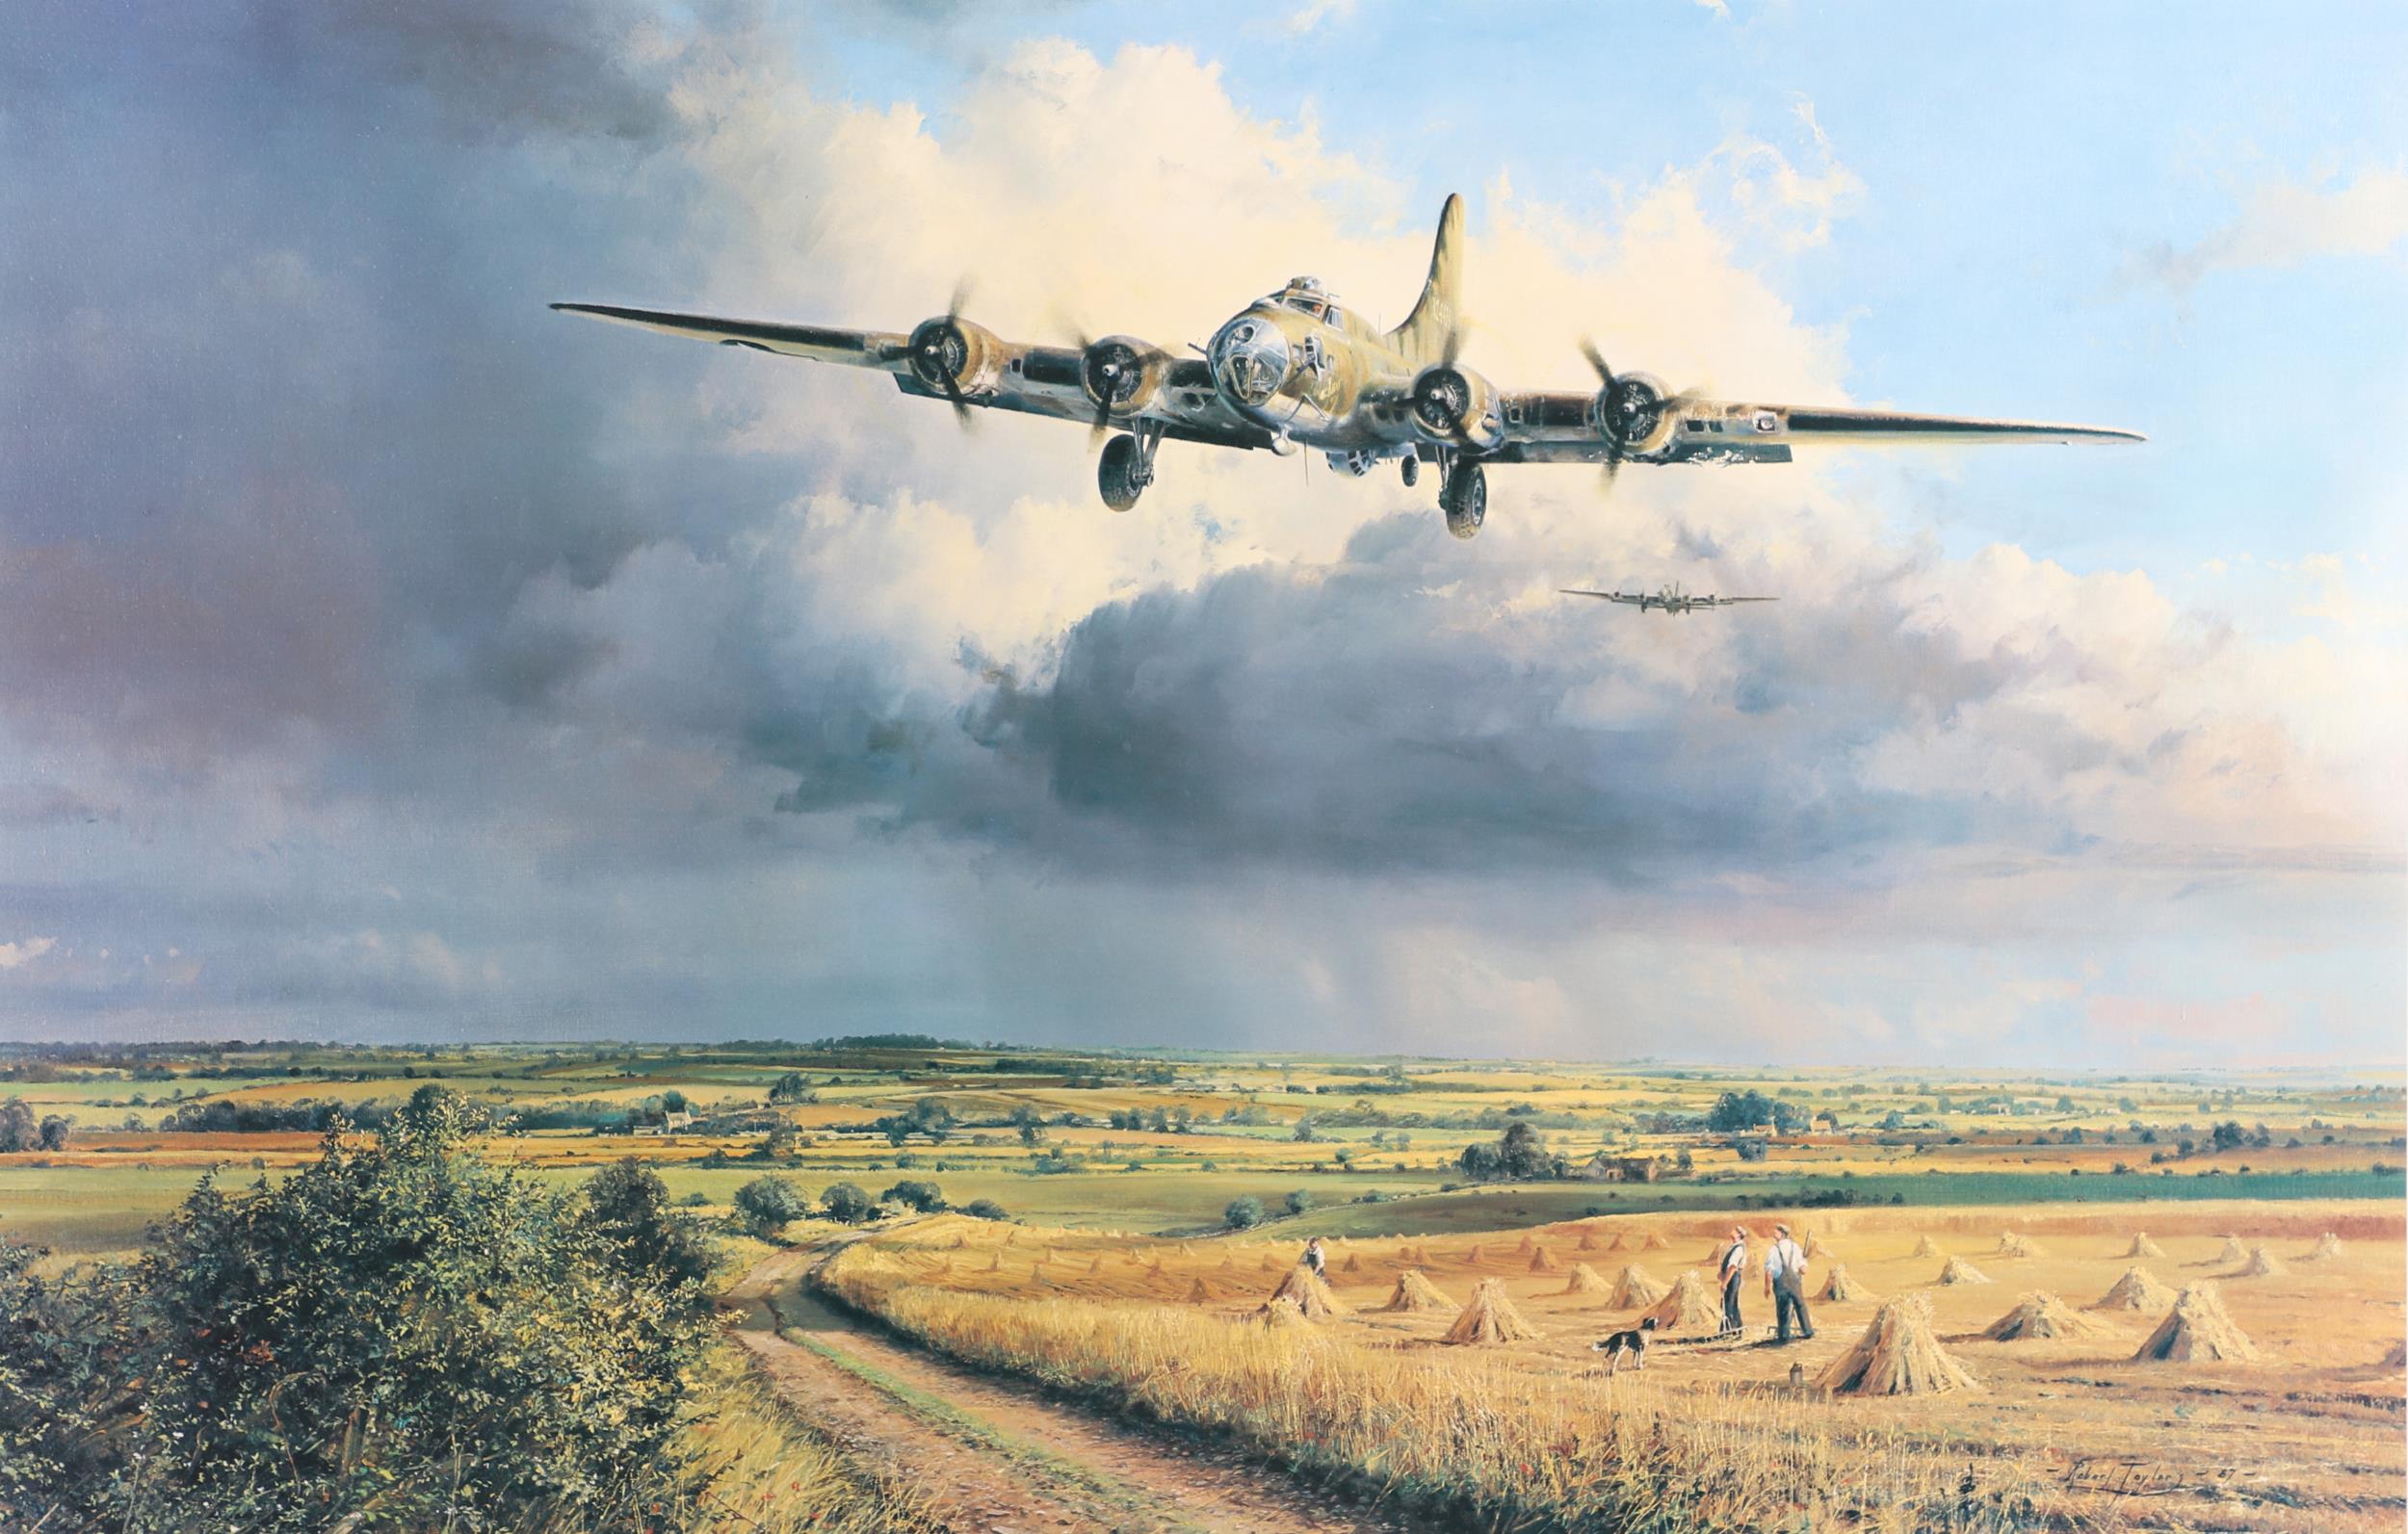 MISSION COMPLETED BY ROBERT TAYLOR, COLOUR PRINT SIGNED BY THE ARTIST AND FIVE PILOTS. - Image 2 of 7